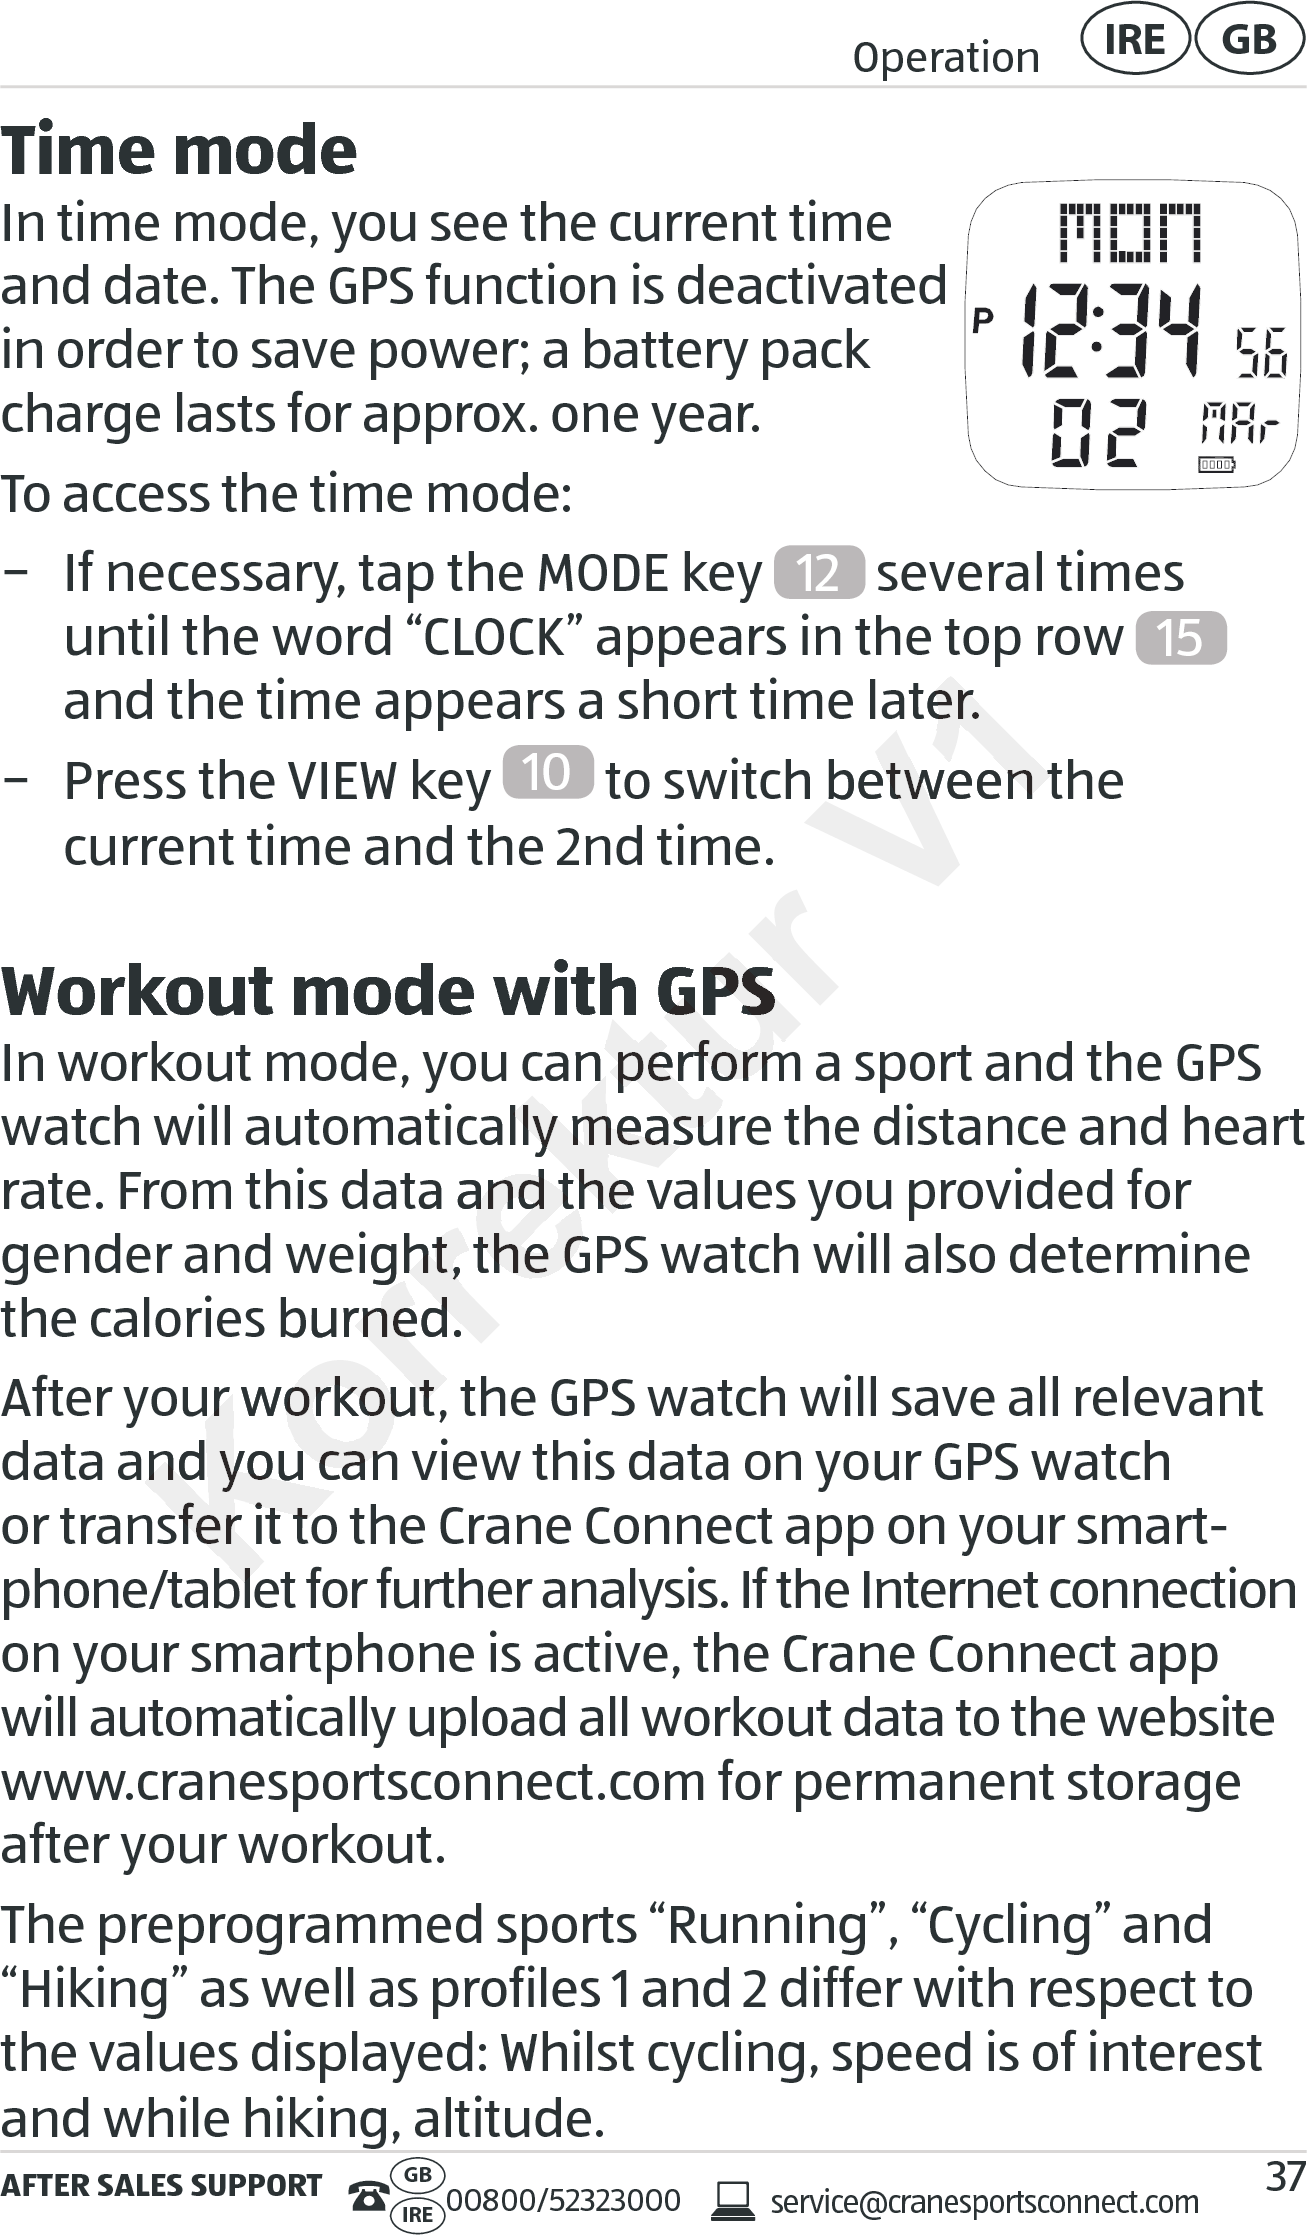 AFTER SALES SUPPORTservice@cranesportsconnect.comGBIRE 00800/52323000Operation GBIRE37Time modeIn time mode, you see the current time  and date. The GPS function is deactivated in order to save power; a battery pack charge lasts for approx. one year.To access the time mode: − If necessary, tap the MODE key  12  several times  until the word “CLOCK” appears in the top row  15  and the time appears a short time later. − Press the VIEW key  10  to switch between the  current time and the 2nd time.Workout mode with GPSIn workout mode, you can perform a sport and the GPS watch will automatically measure the distance and heart rate. From this data and the values you provided for gender and weight, the GPS watch will also determine the calories burned.After your workout, the GPS watch will save all relevant data and you can view this data on your GPS watch or transfer it to the Crane Connect app on your smart-phone/tablet for further analysis. If the Internet connection on your smartphone is active, the Crane Connect app will automatically upload all workout data to the website www.cranesportsconnect.com for permanent storage after your workout.The preprogrammed sports “Running”, “Cycling” and “Hiking” as well as profiles 1 and 2 differ with respect to the values displayed: Whilst cycling, speed is of interest and while hiking, altitude.Korrektur current time and the 2nd time.Workout mode with GPSWorkout mode with GPSIn workout mode, you can perform a sport and the GPS In workout mode, you can perform a sport and the GPS watch will automatically measure the distance and heart watch will automatically measure the distance and heart rate. From this data and the values you provided for rate. From this data and the values you provided for gender and weight, the GPS watch will also determine gender and weight, the GPS watch will also determine the calories burned.the calories burned.After your workout, the GPS watch will save all relevant After your workout, the GPS watch will save all relevant data and you can view this data on your GPS watch data and you can view this data on your GPS watch or transfer it to the Crane Connect app on your smartor transfer it to the Crane Connect app on your smartphone/tablet for further analysis. If the Internet connectionphone/tablet for further analysis. If the Internet connectionV1and the time appears a short time later.and the time appears a short time later. to switch between the   to switch between the  